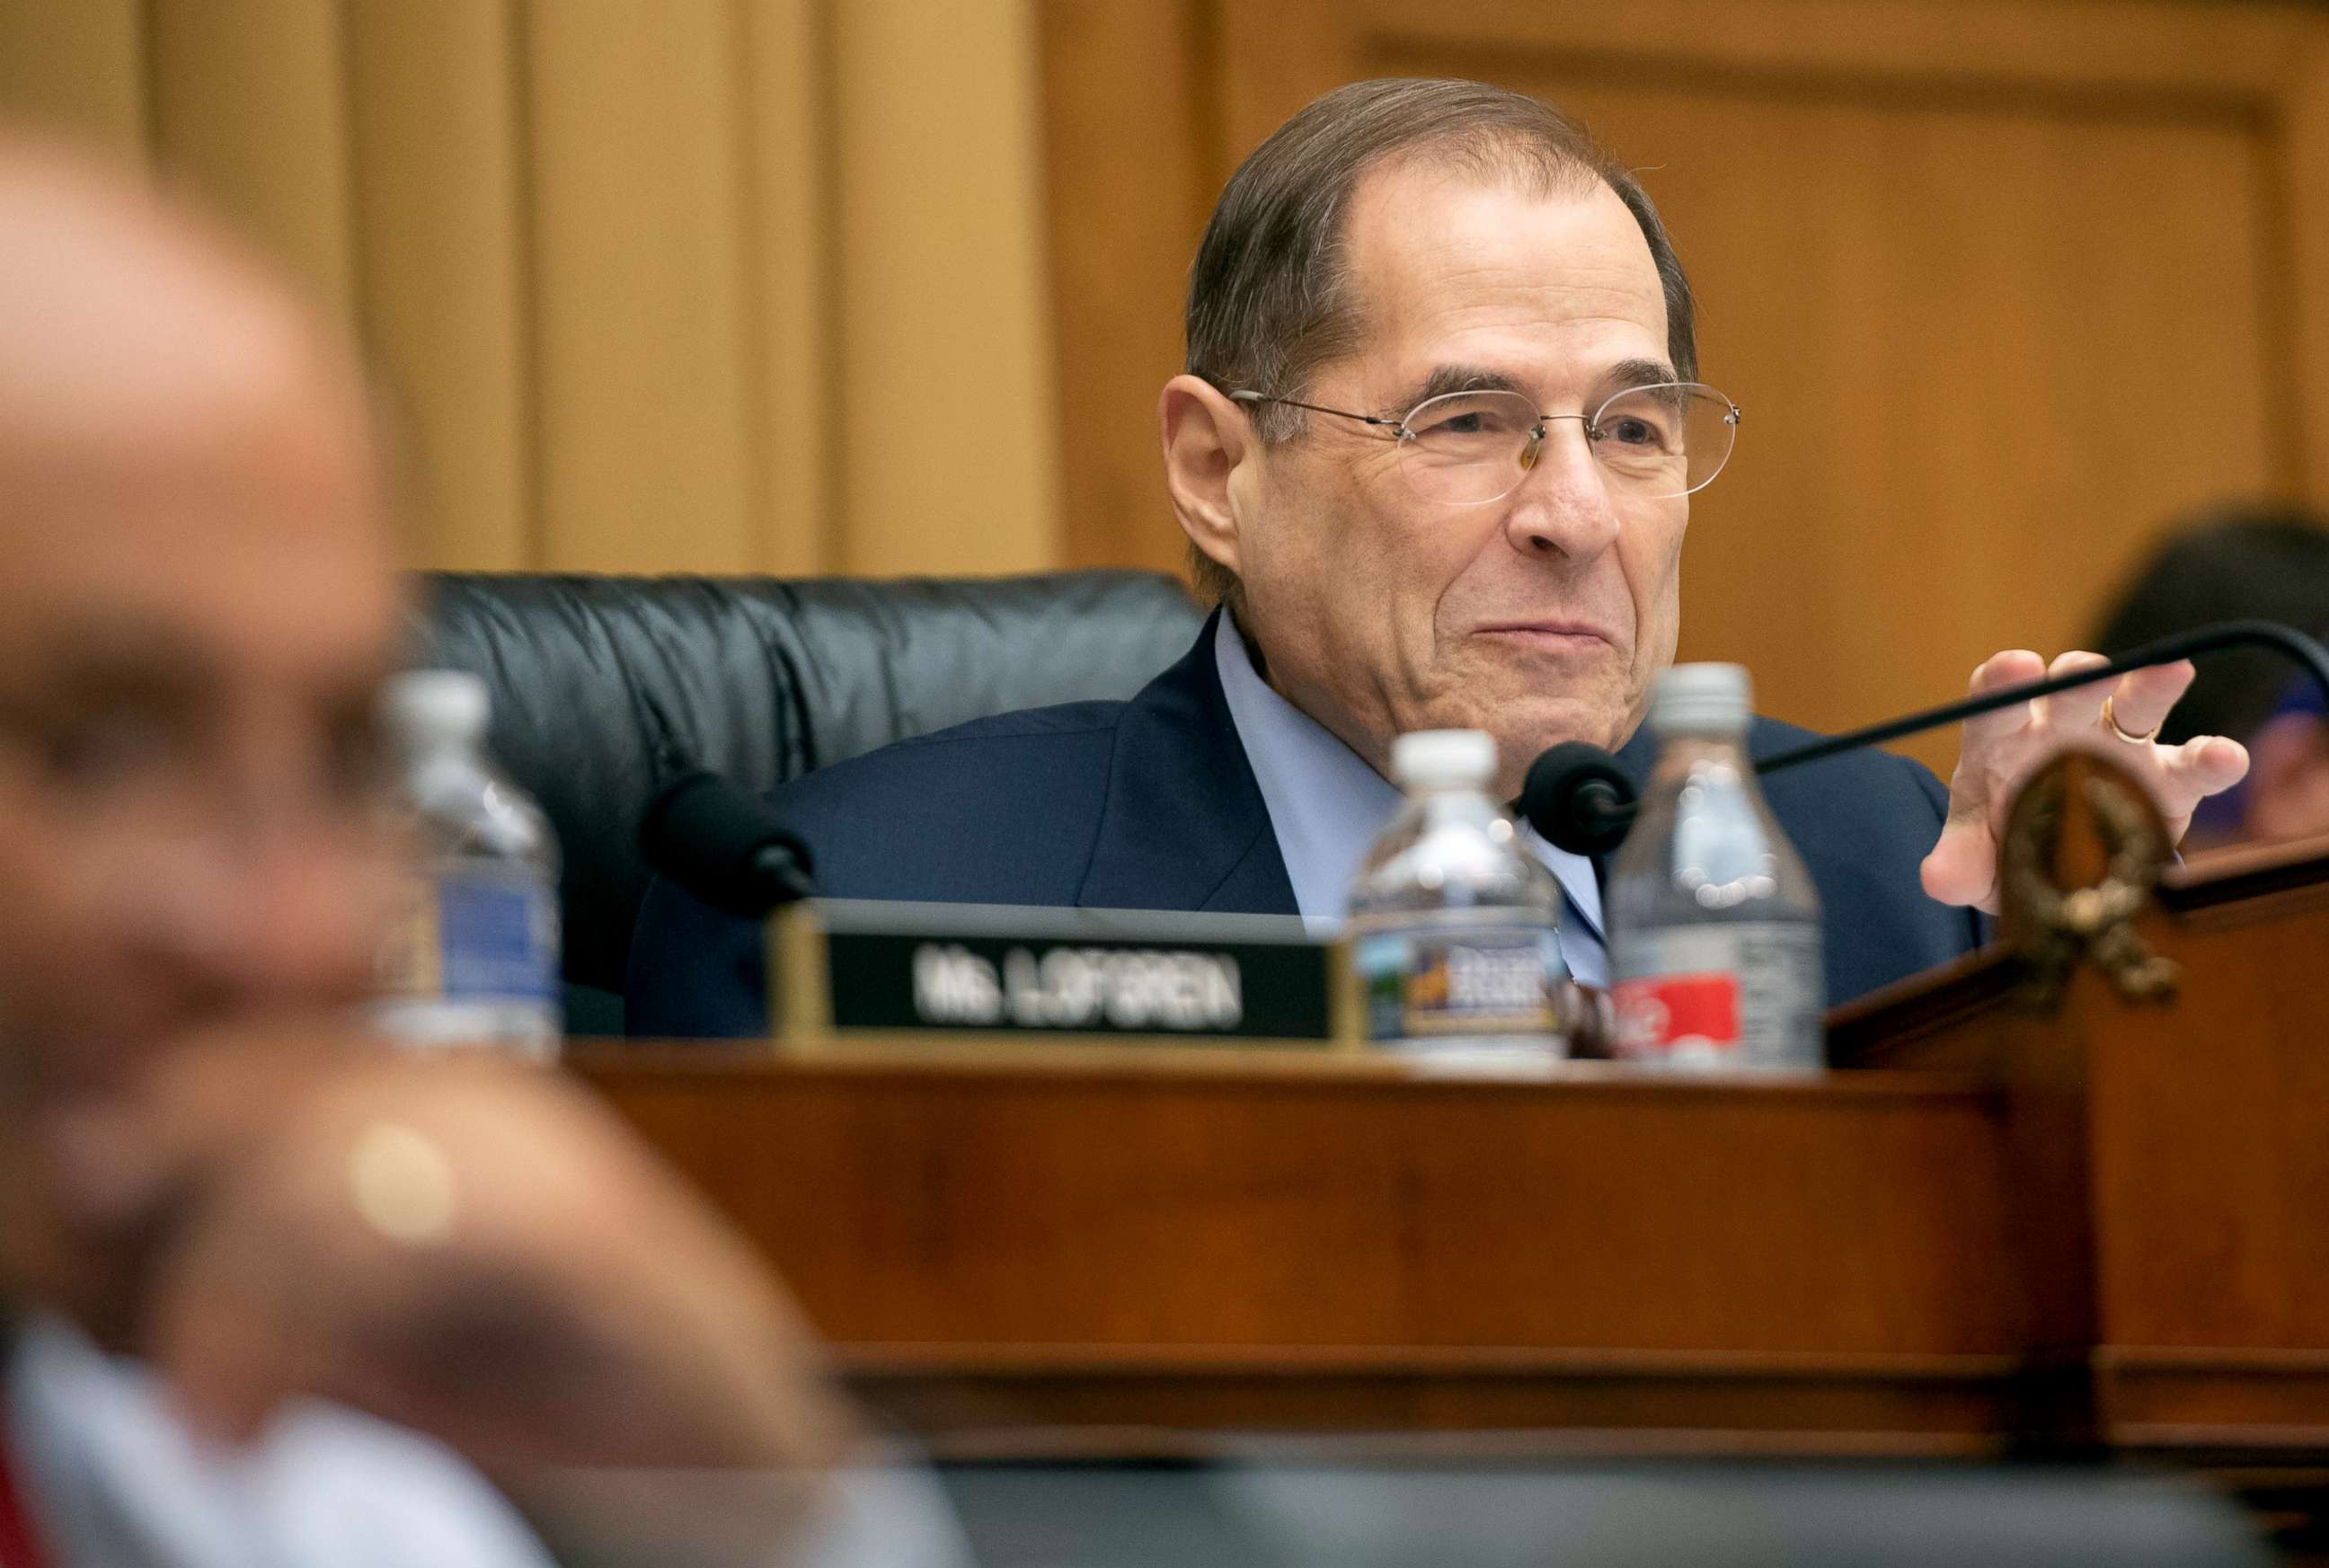 PHOTO: Rep. Jerry Nadler, Chairman of the House Judiciary Committee, speaks during a hearing with acting Attorney General Matt Whitaker on Capitol Hill in Washington, DC, Feb. 8, 2019.